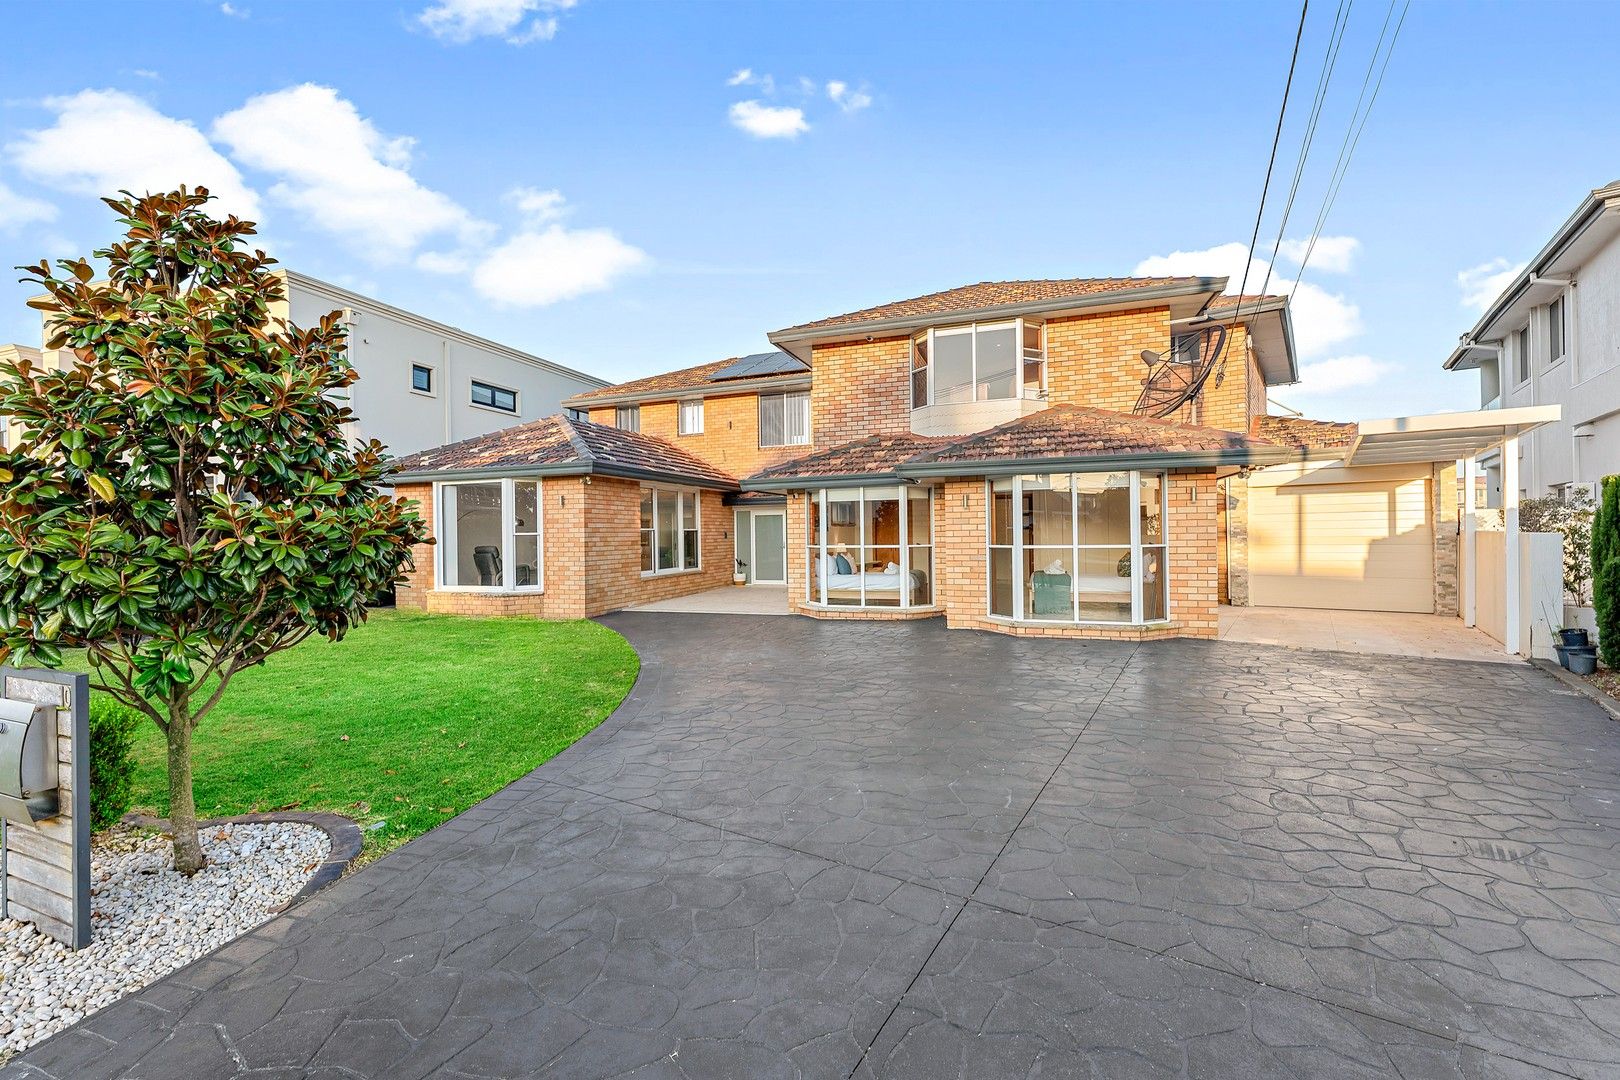 10 Castlereagh Crescent, Sylvania Waters NSW 2224, Image 0